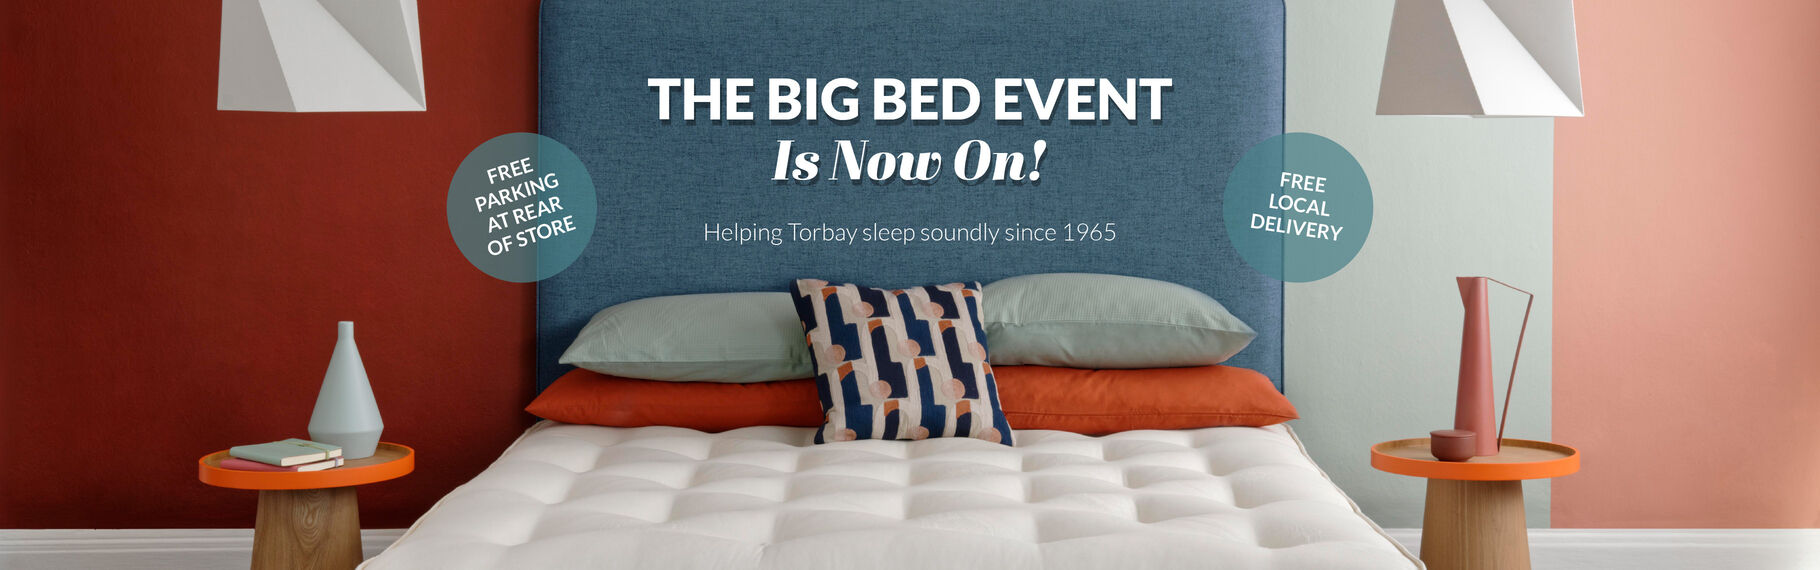 The Big Bed Event Is Now On!